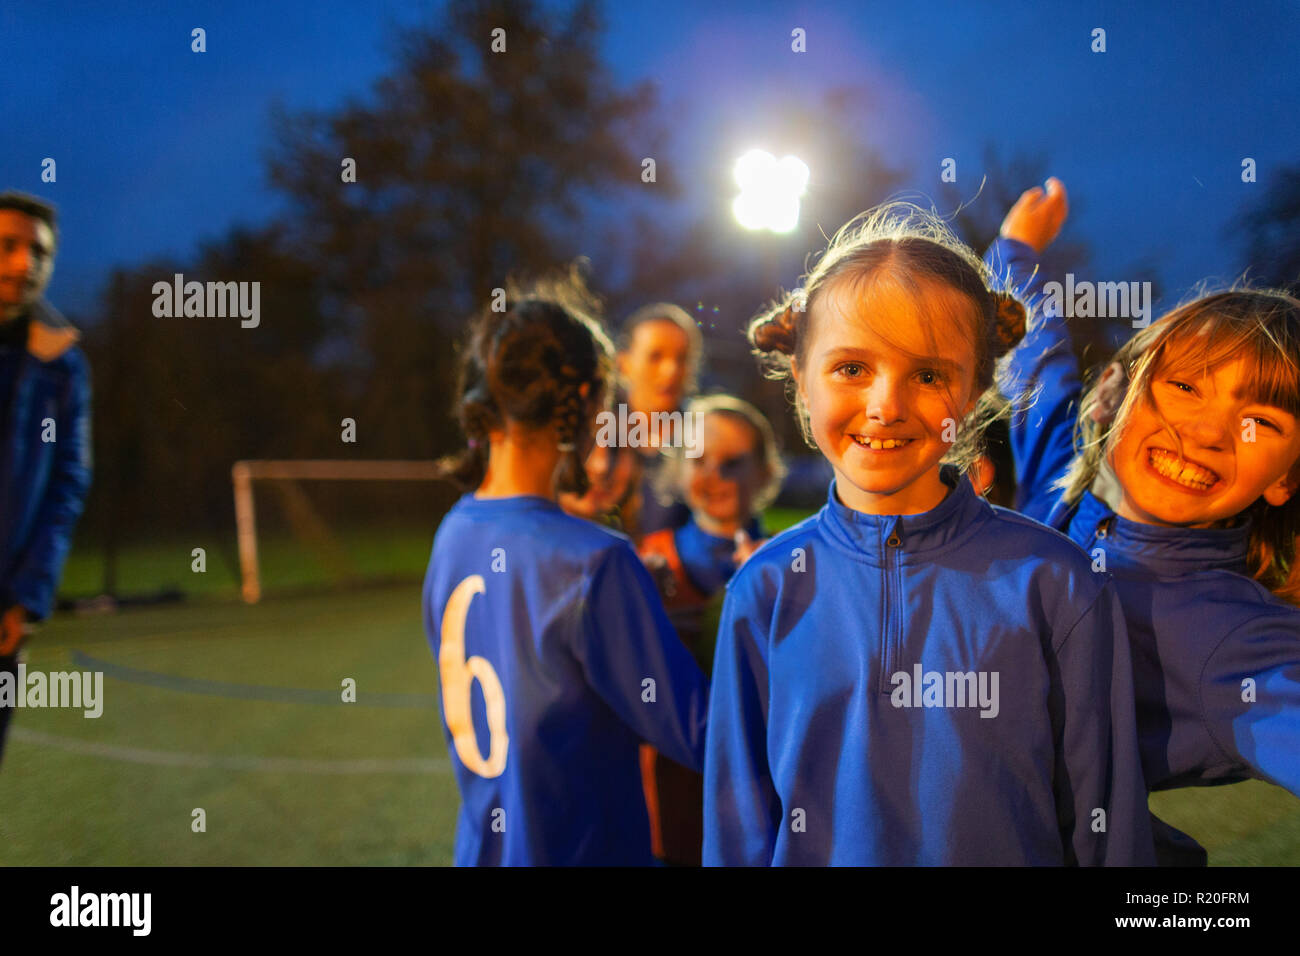 Portrait confident, happy girl soccer players on field at night Stock Photo